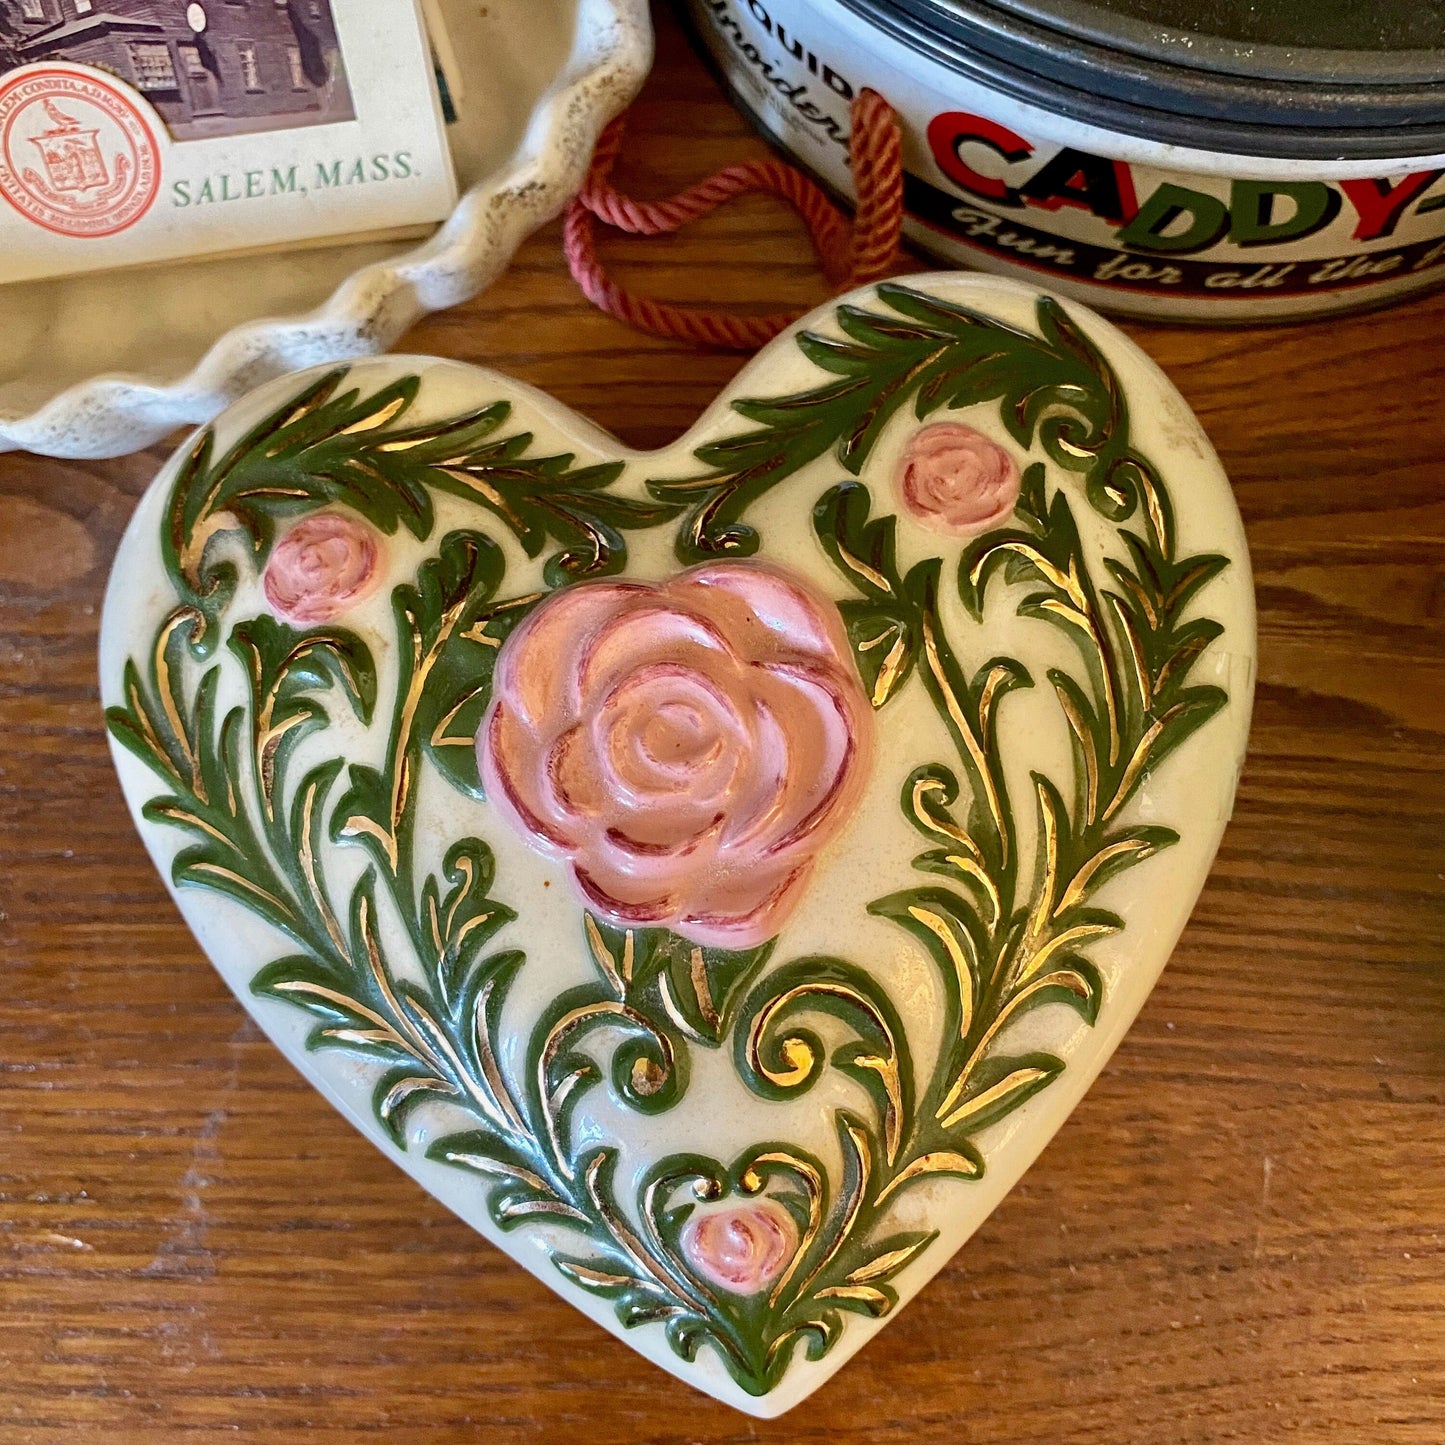 Vintage rose heart shaped box. Pretty ceramic porcelain trinket jewelry box with pink and green floral design. Victorian romantic home decor